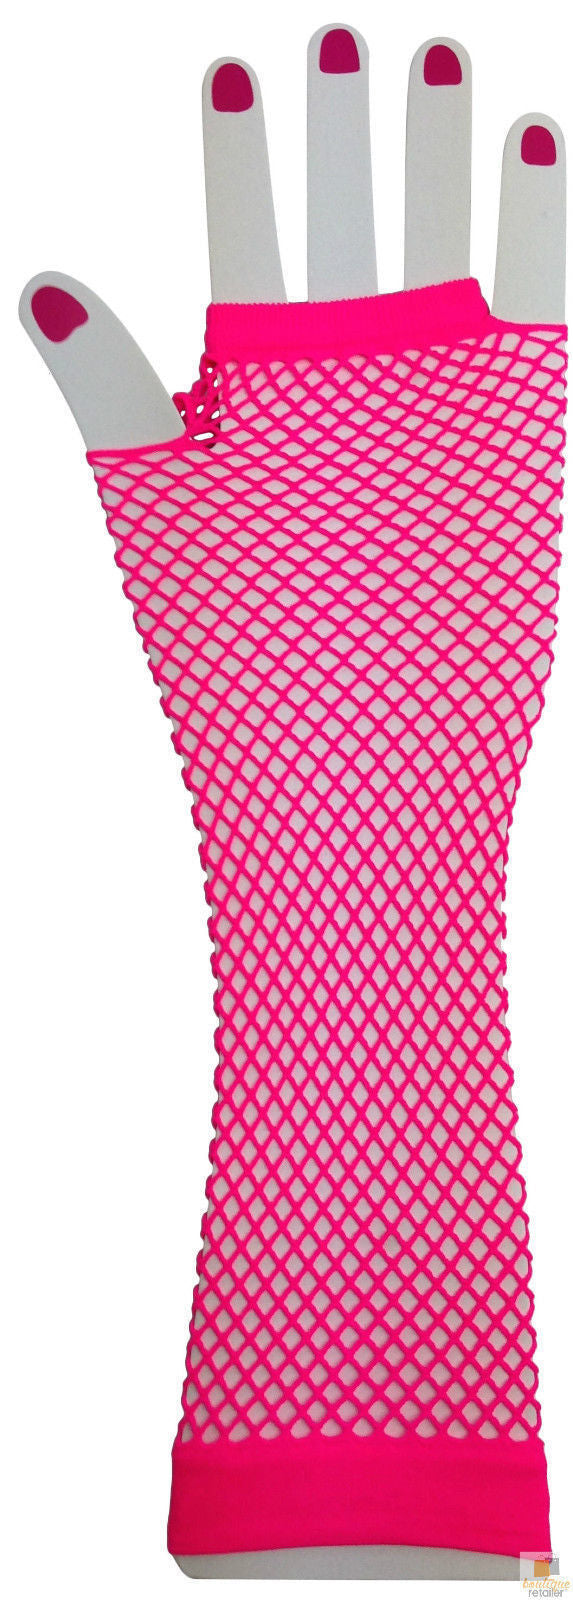 FISHNET GLOVES Fingerless Elbow Length 70s 80s Womens Costume Party Dance - Hot Pink - One Size